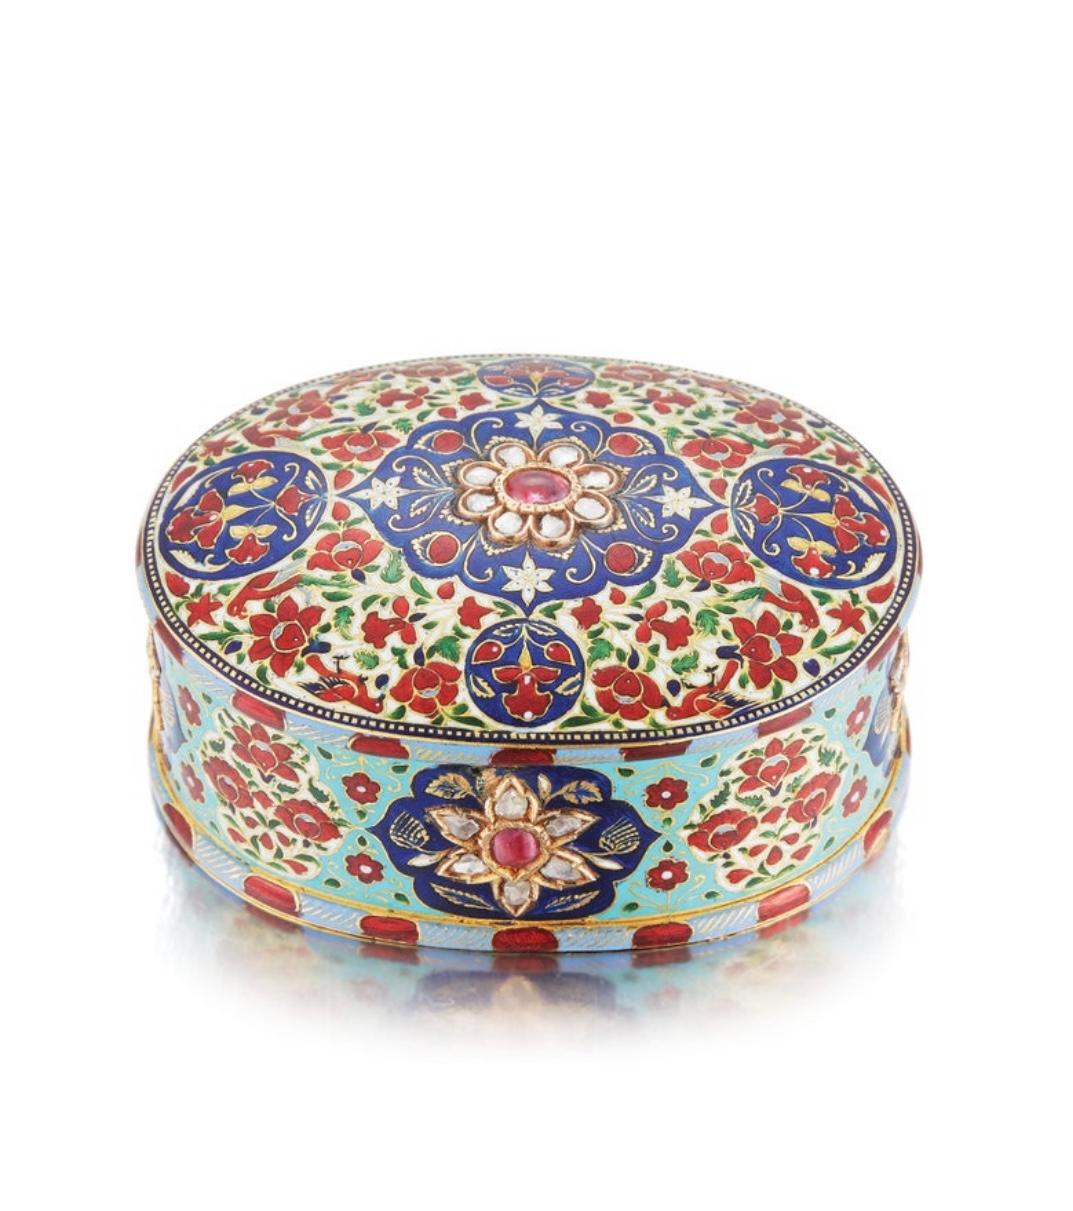 19th century Indian enamel gold box

Set with polki diamonds

Dimensions: approximately 2.63 x 1.88 inches

Weight: 175.7 grams

Circa 1850.
